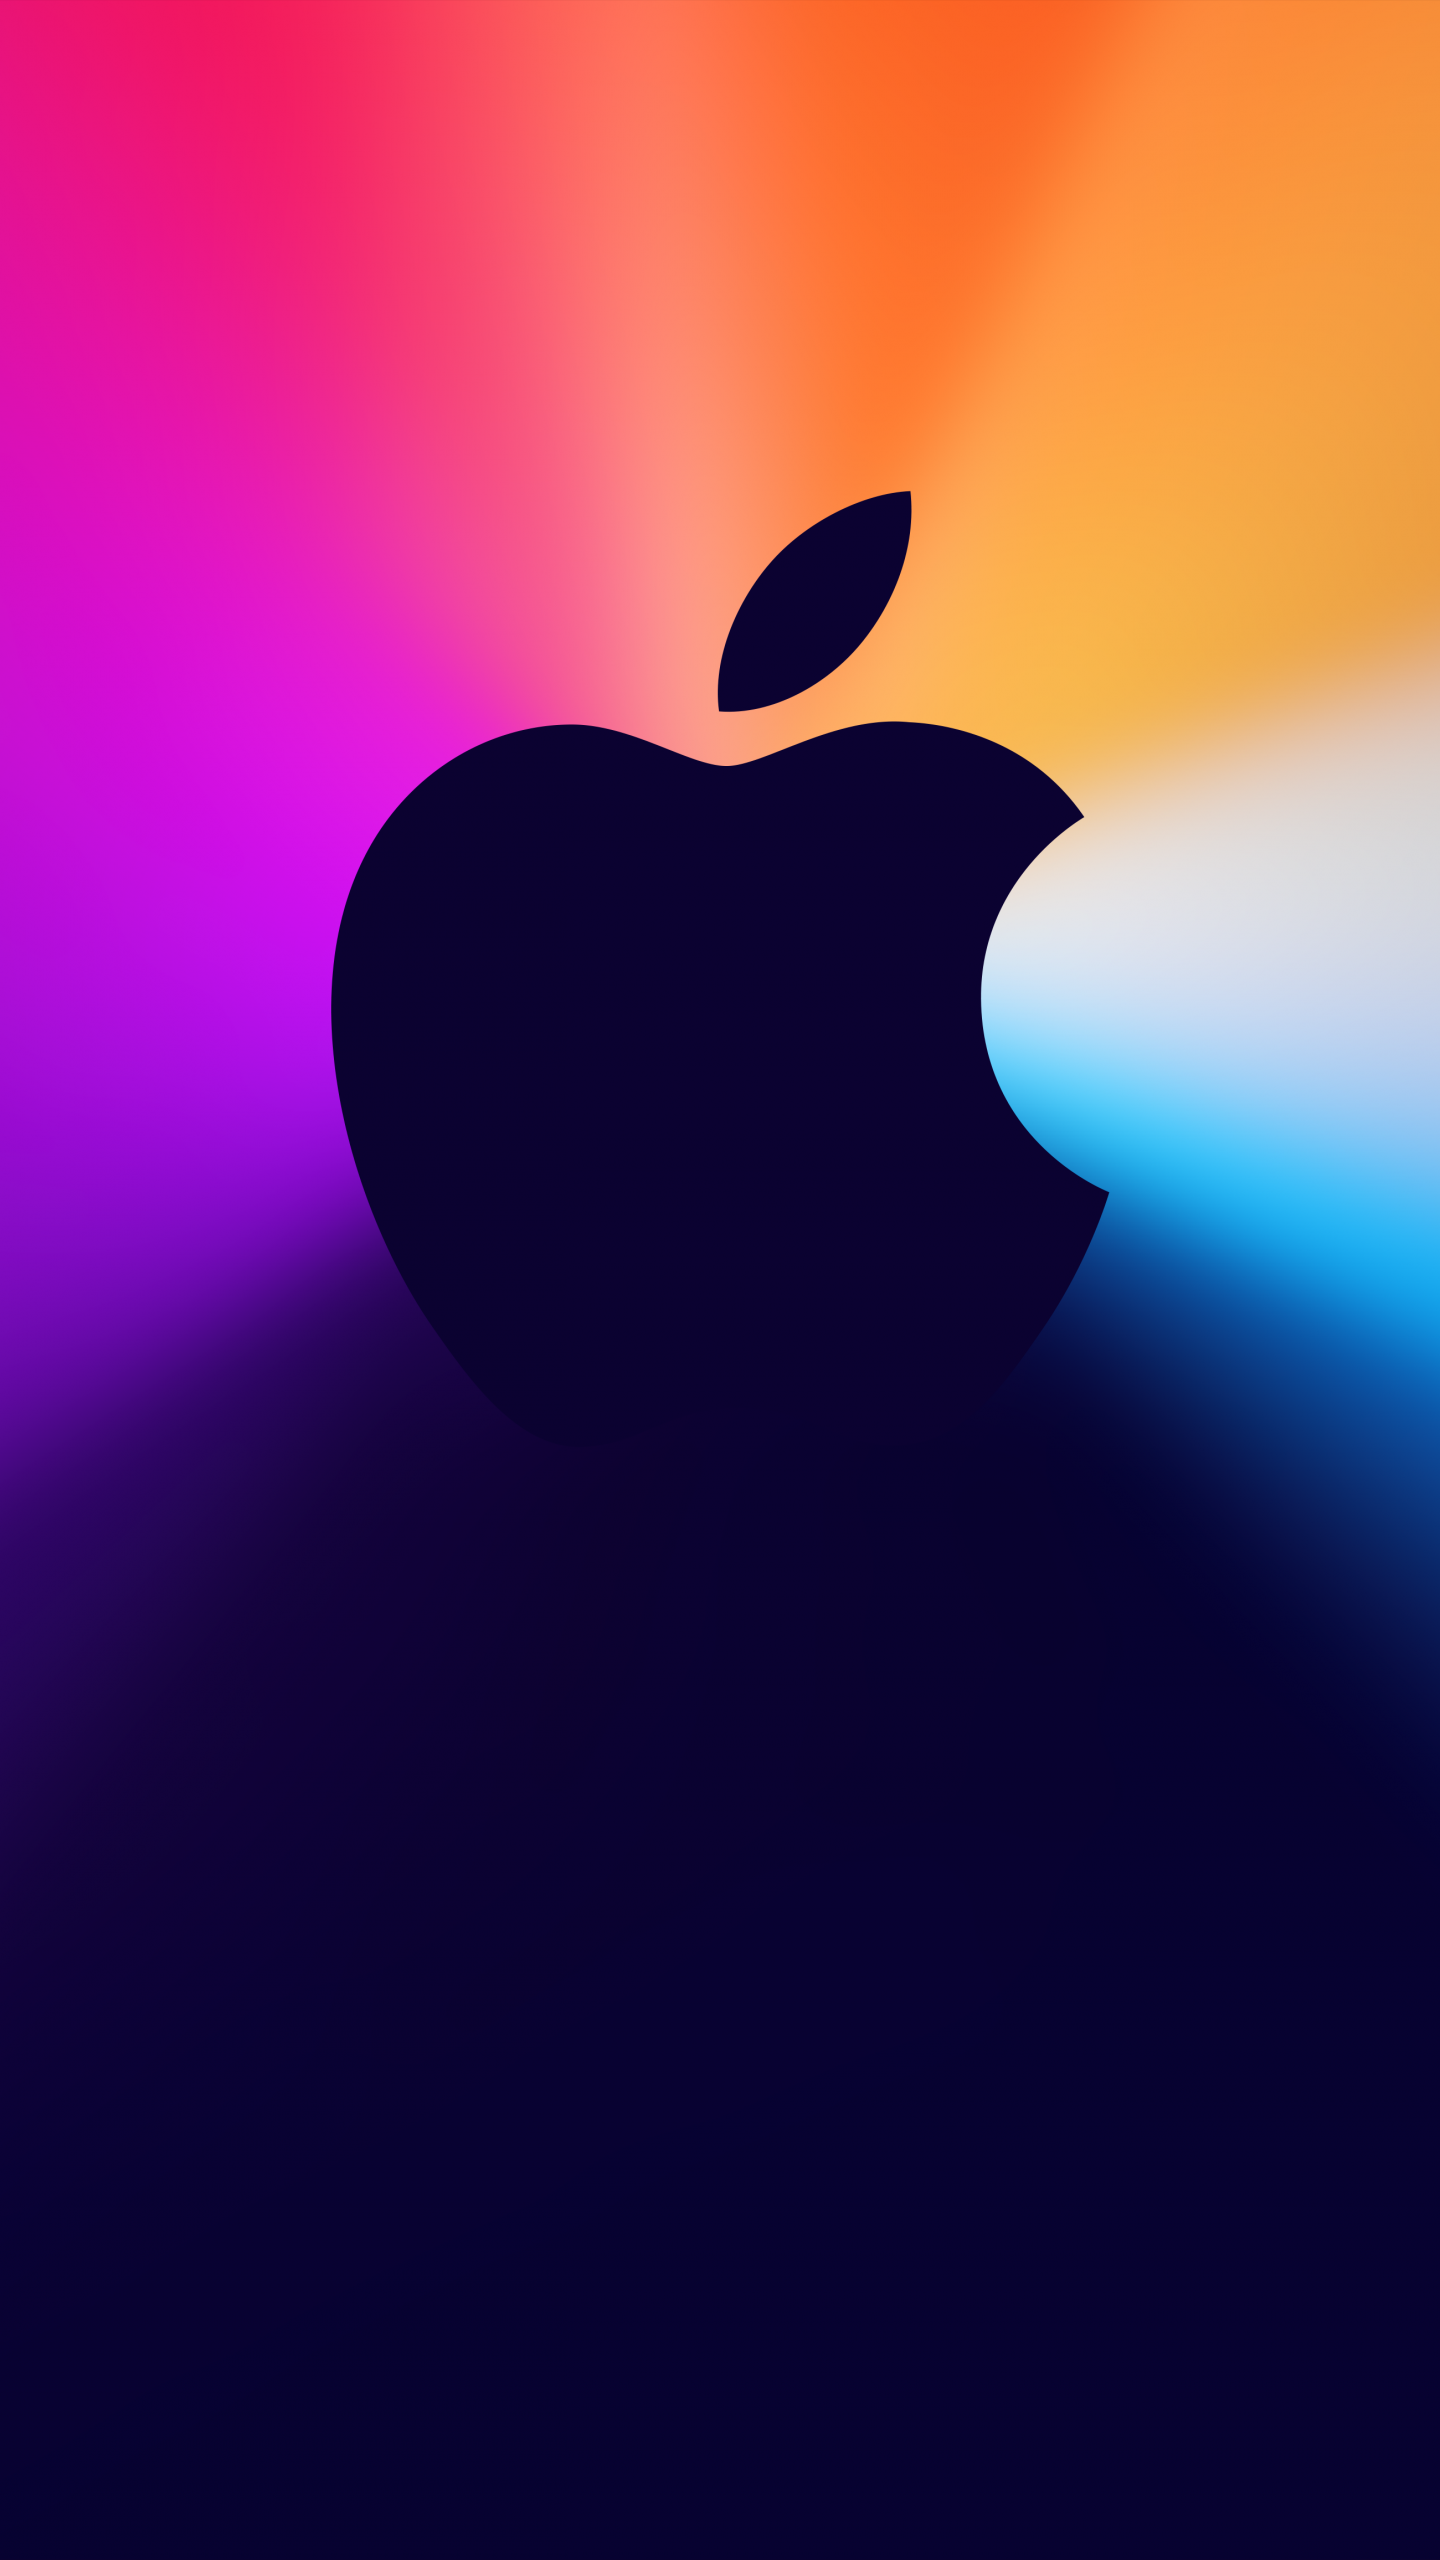 One More Thing Wallpaper 4k Apple Logo Gradient Background Apple Event Technology 3161